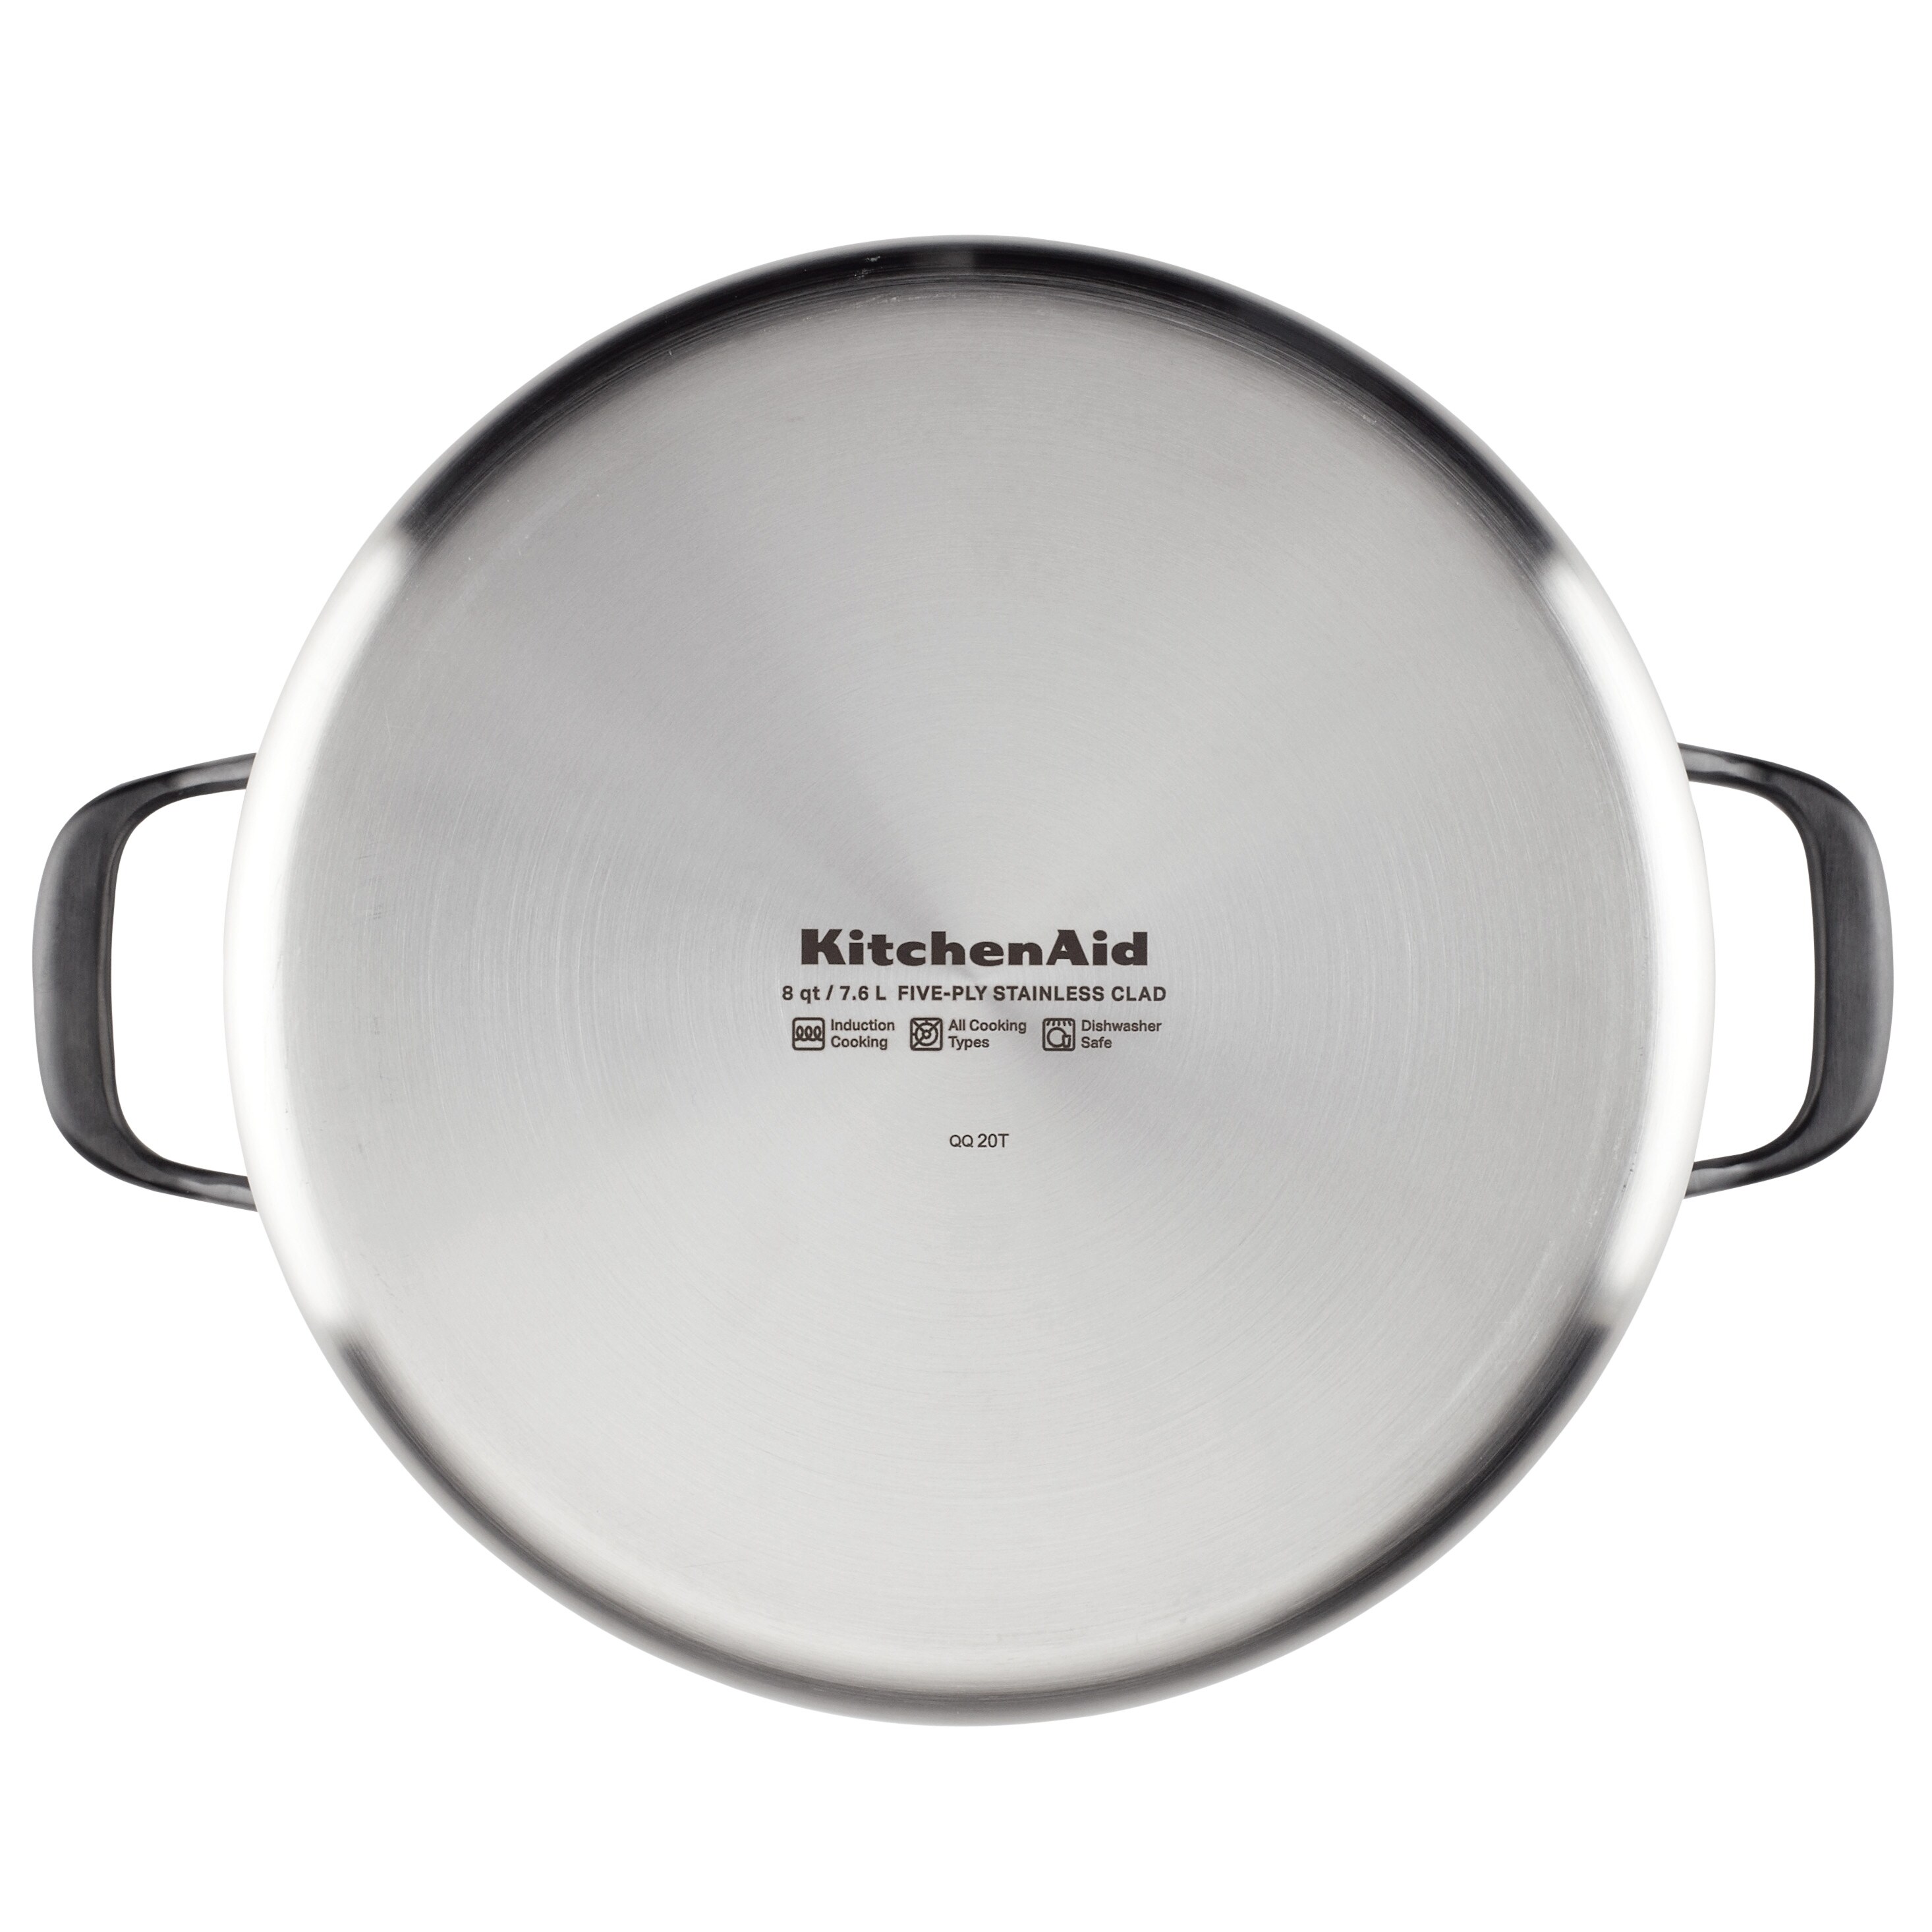 https://ak1.ostkcdn.com/images/products/is/images/direct/d58c884839adb8ee14794fa53c6575b2a89419a8/KitchenAid-5-Ply-Clad-Stainless-Steel-Stockpot-with-Lid%2C-8qt.jpg